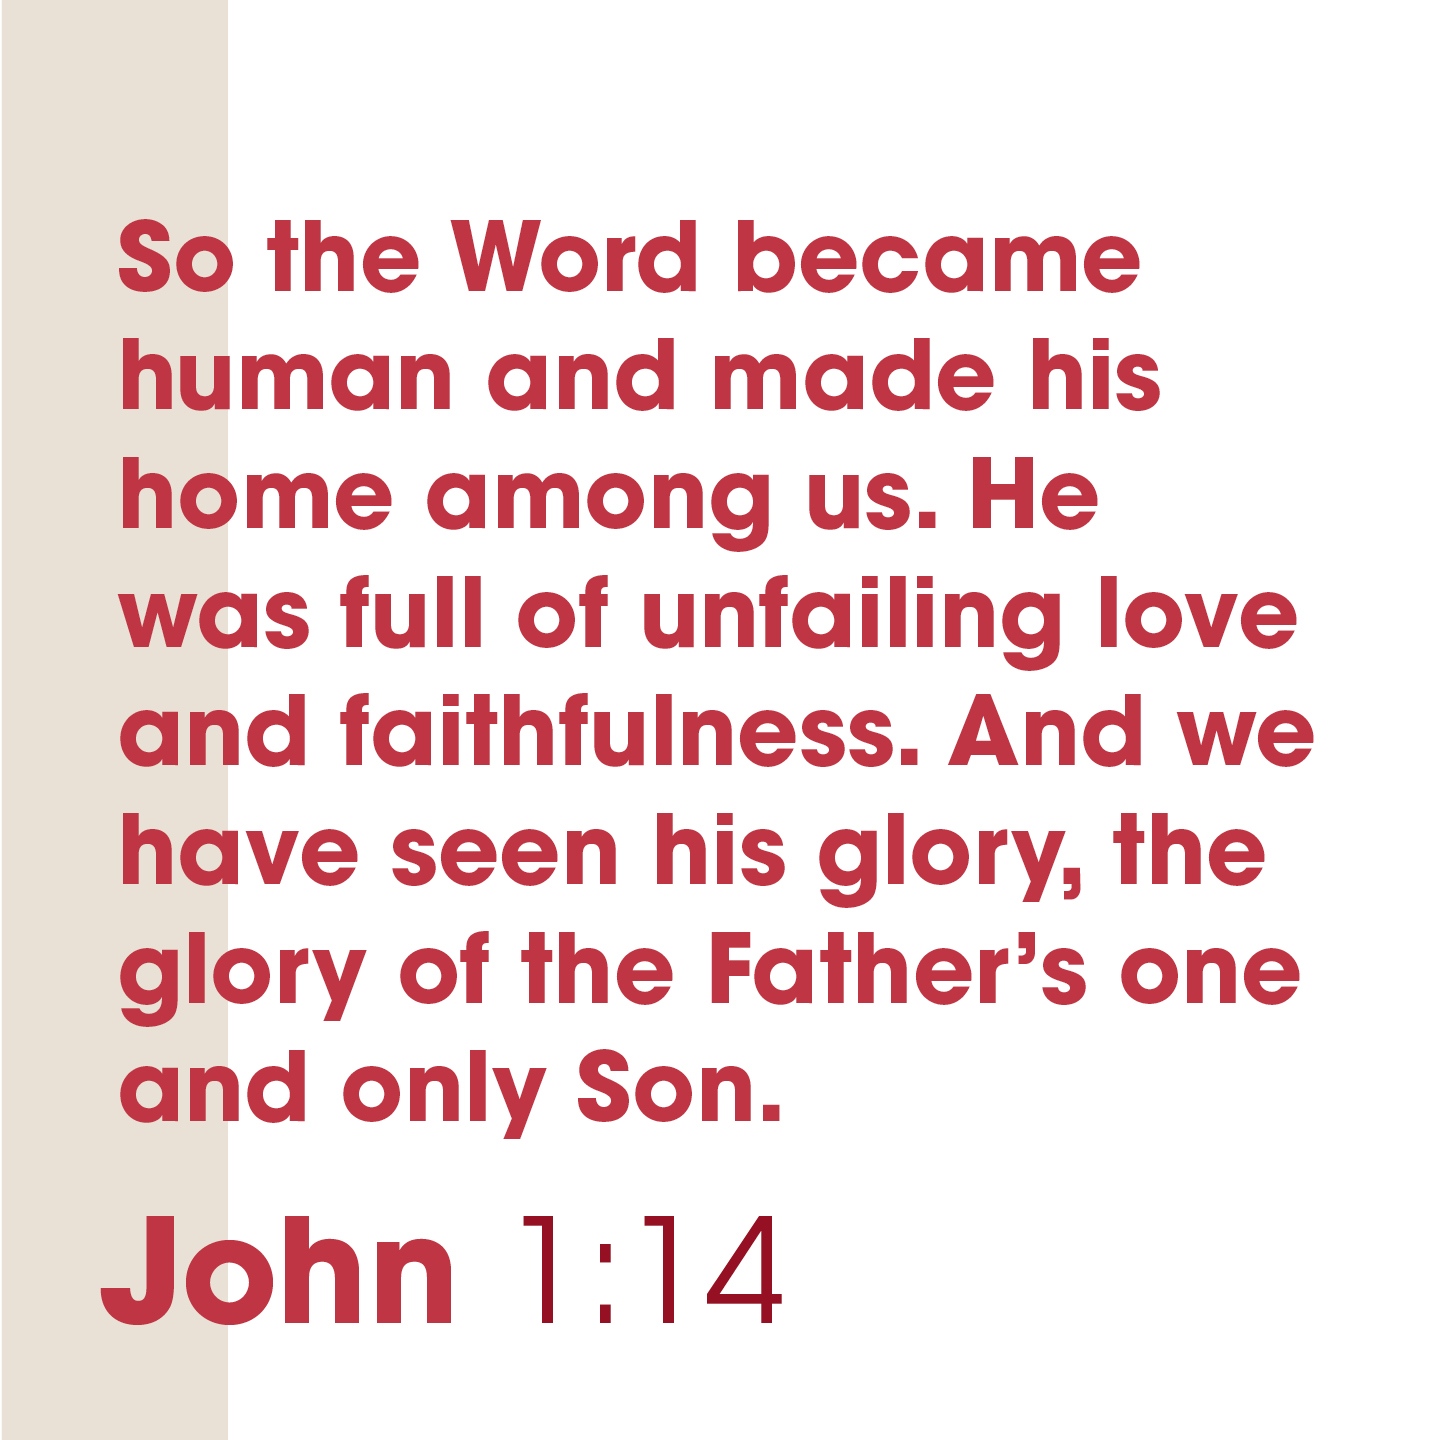 So the Word became human and made his home among us He was full of unfailing love and faithfulness. And we have seen his glory; the glory of the Father's one and only Son: John I;14